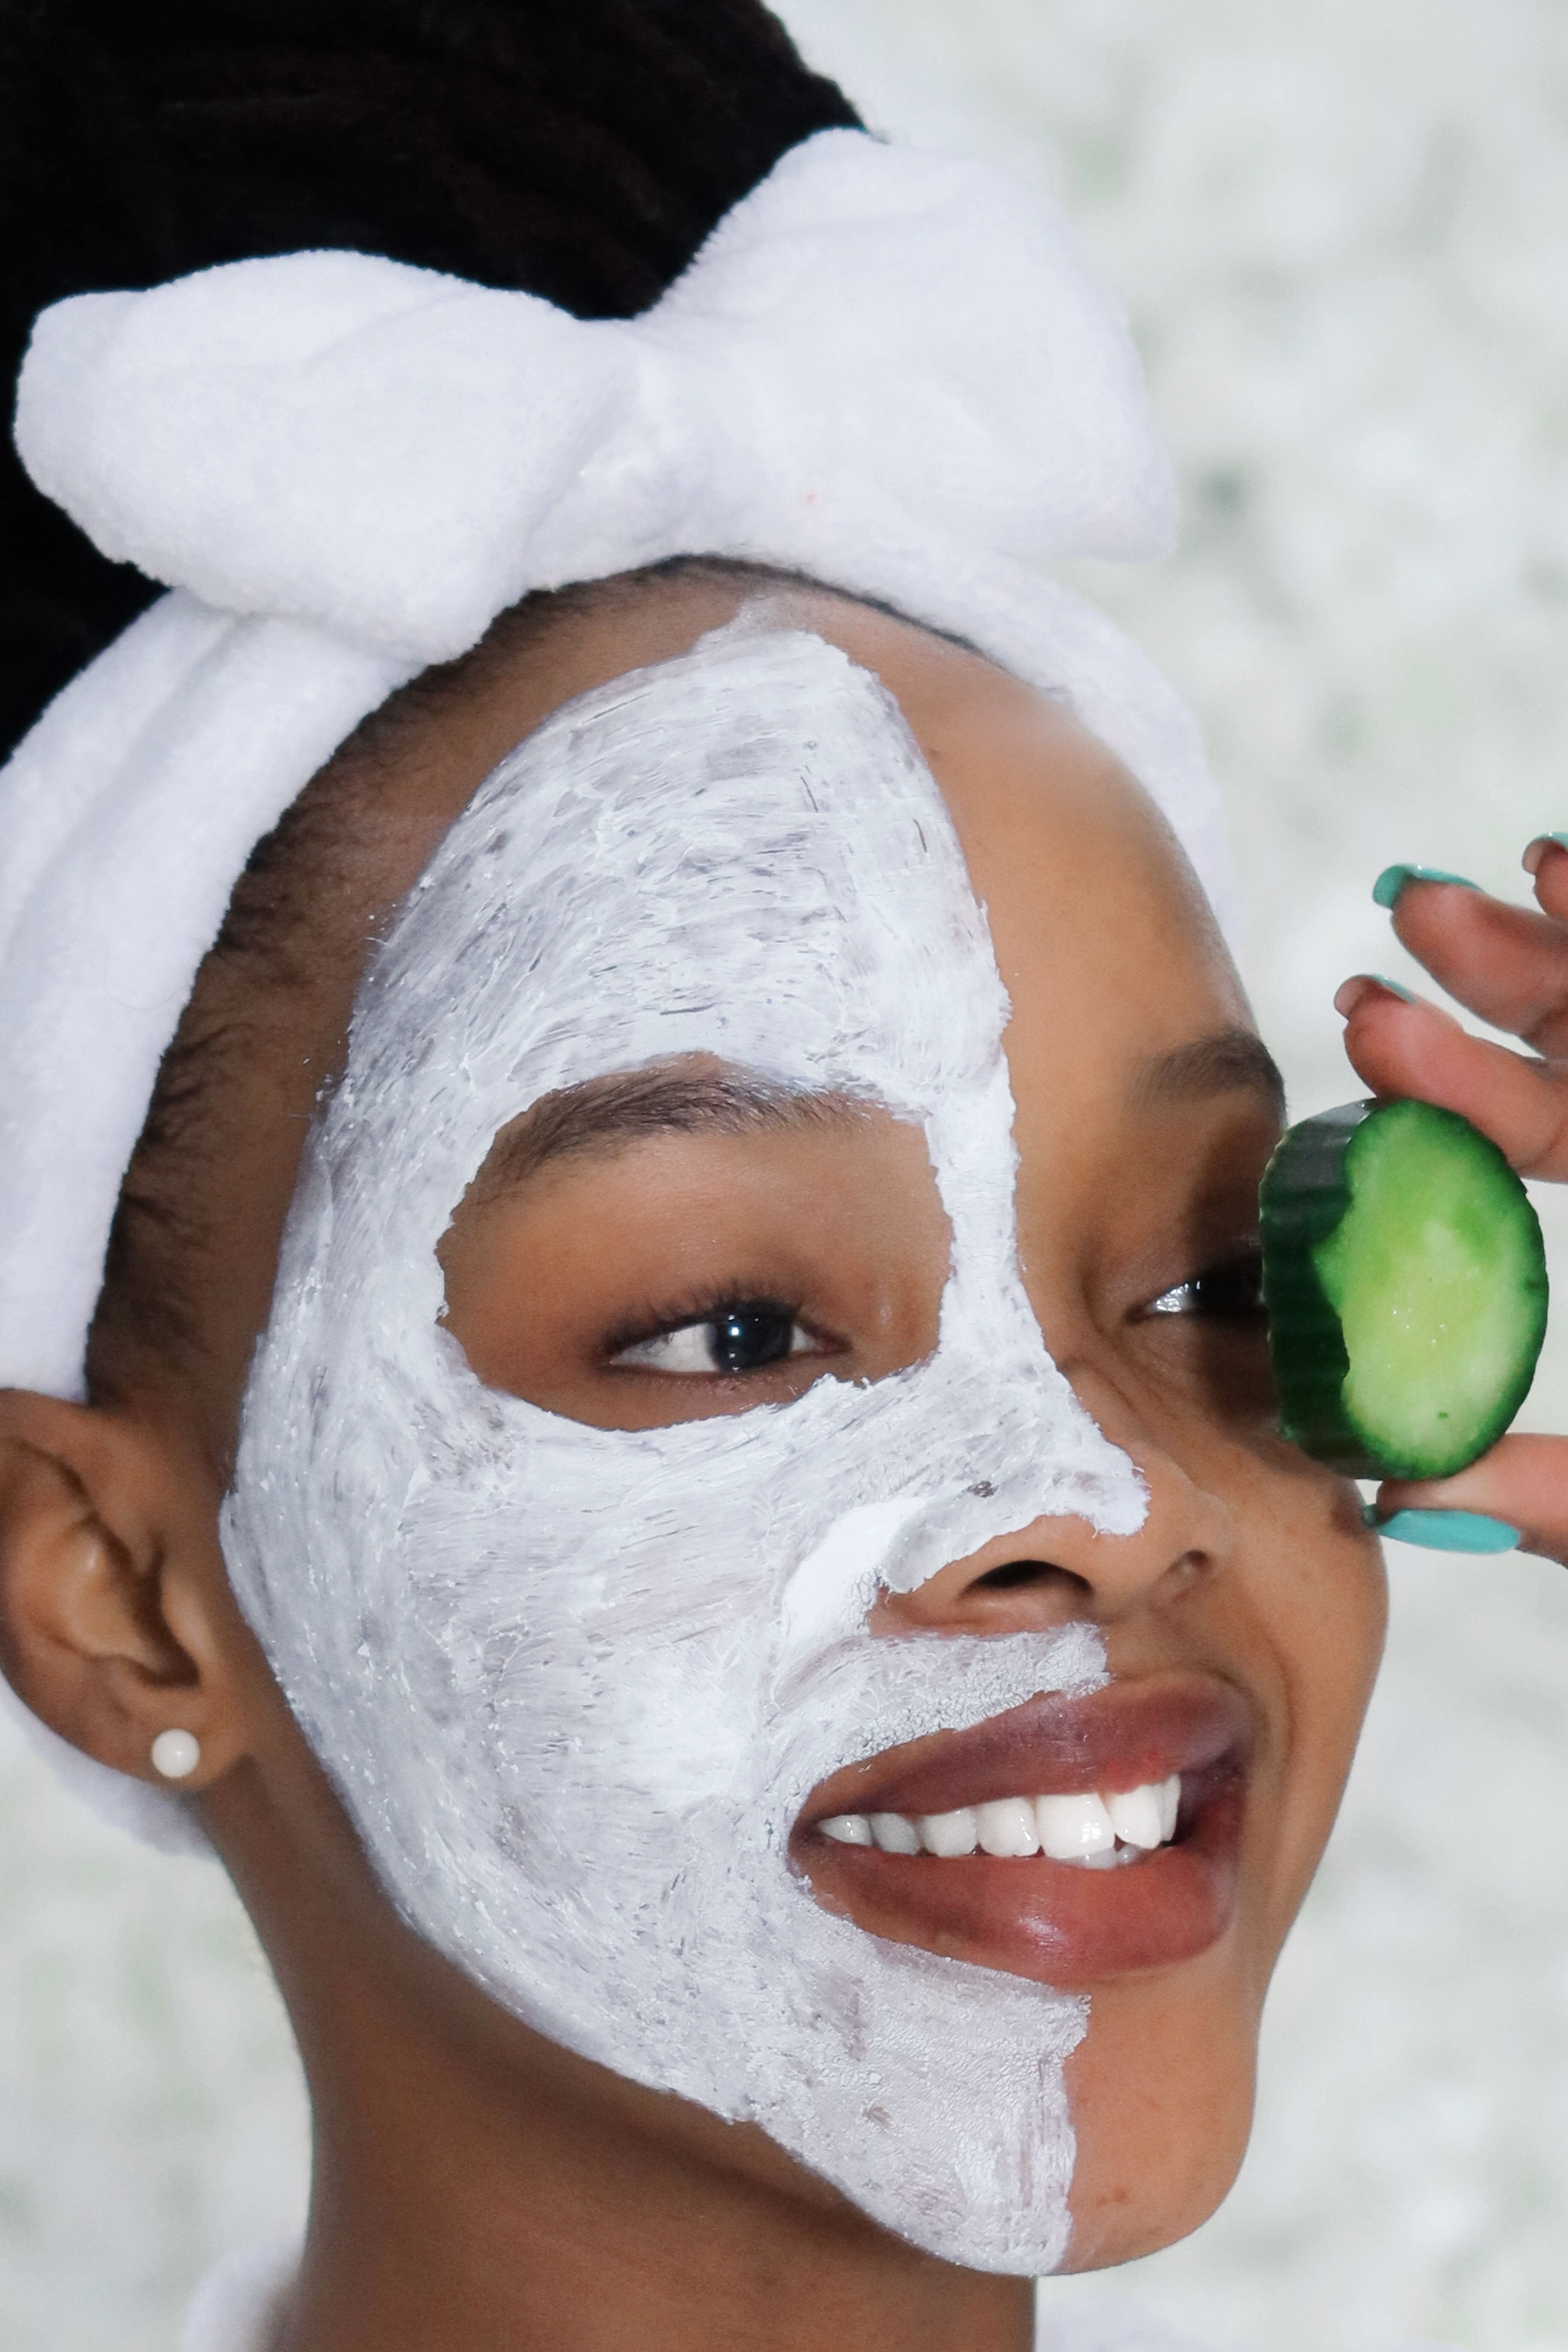 Skincare in your 20s